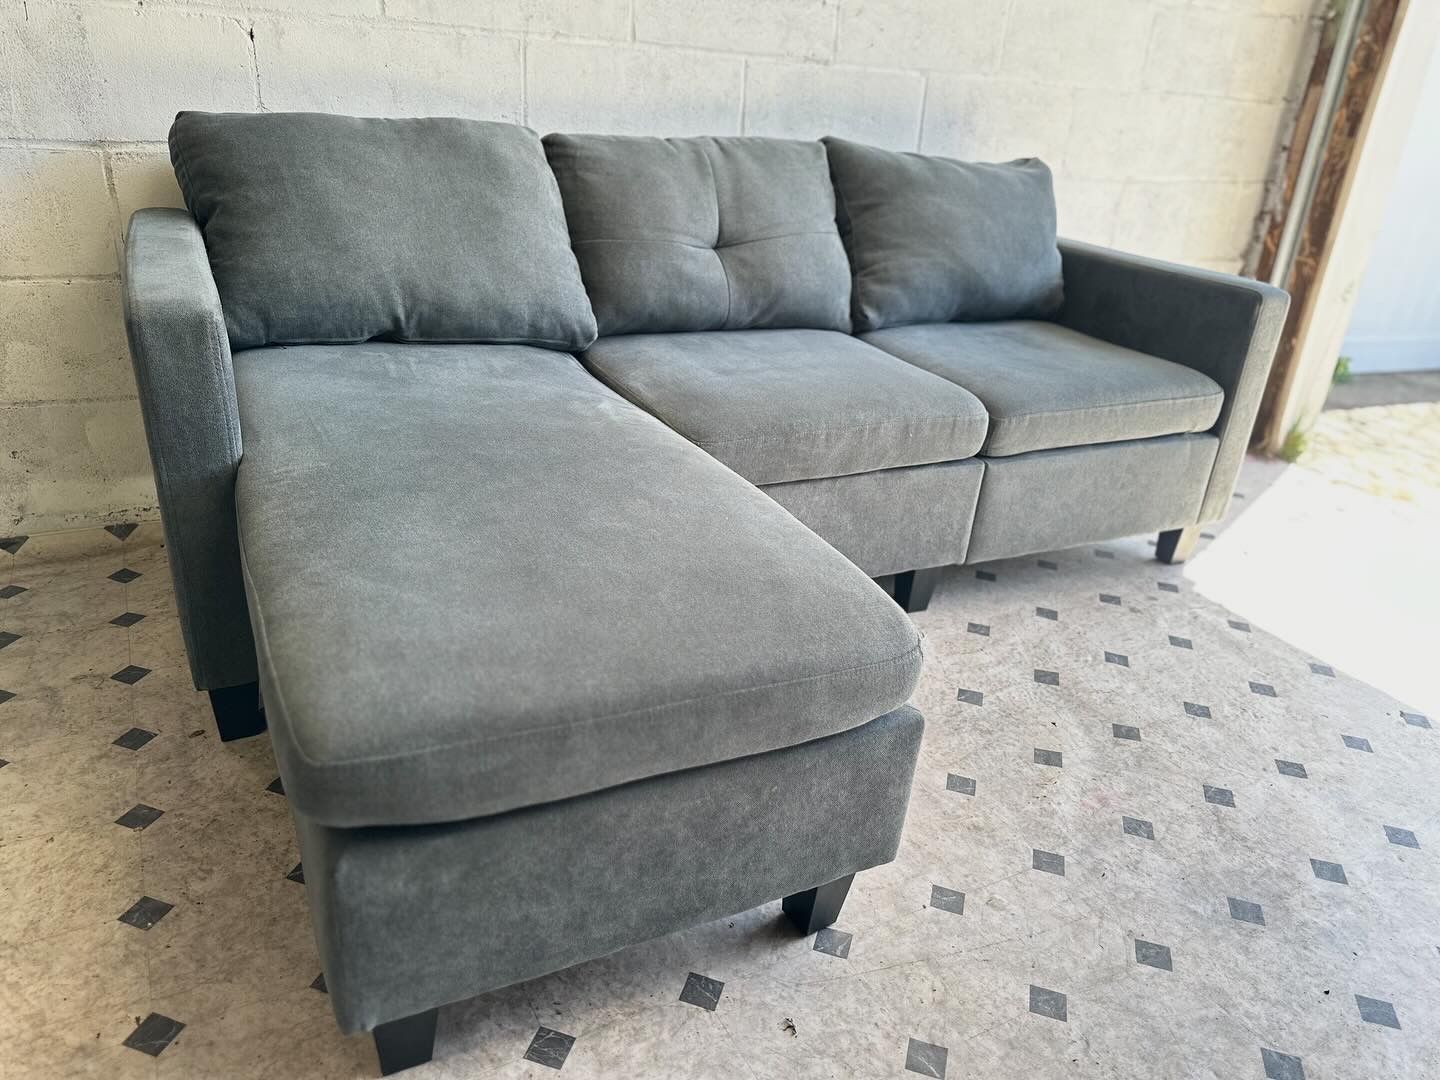 MODERN GRAY SECTIONAL SOFA / FREE DELIVERY INCLUDED! / PICK UP OPTION!